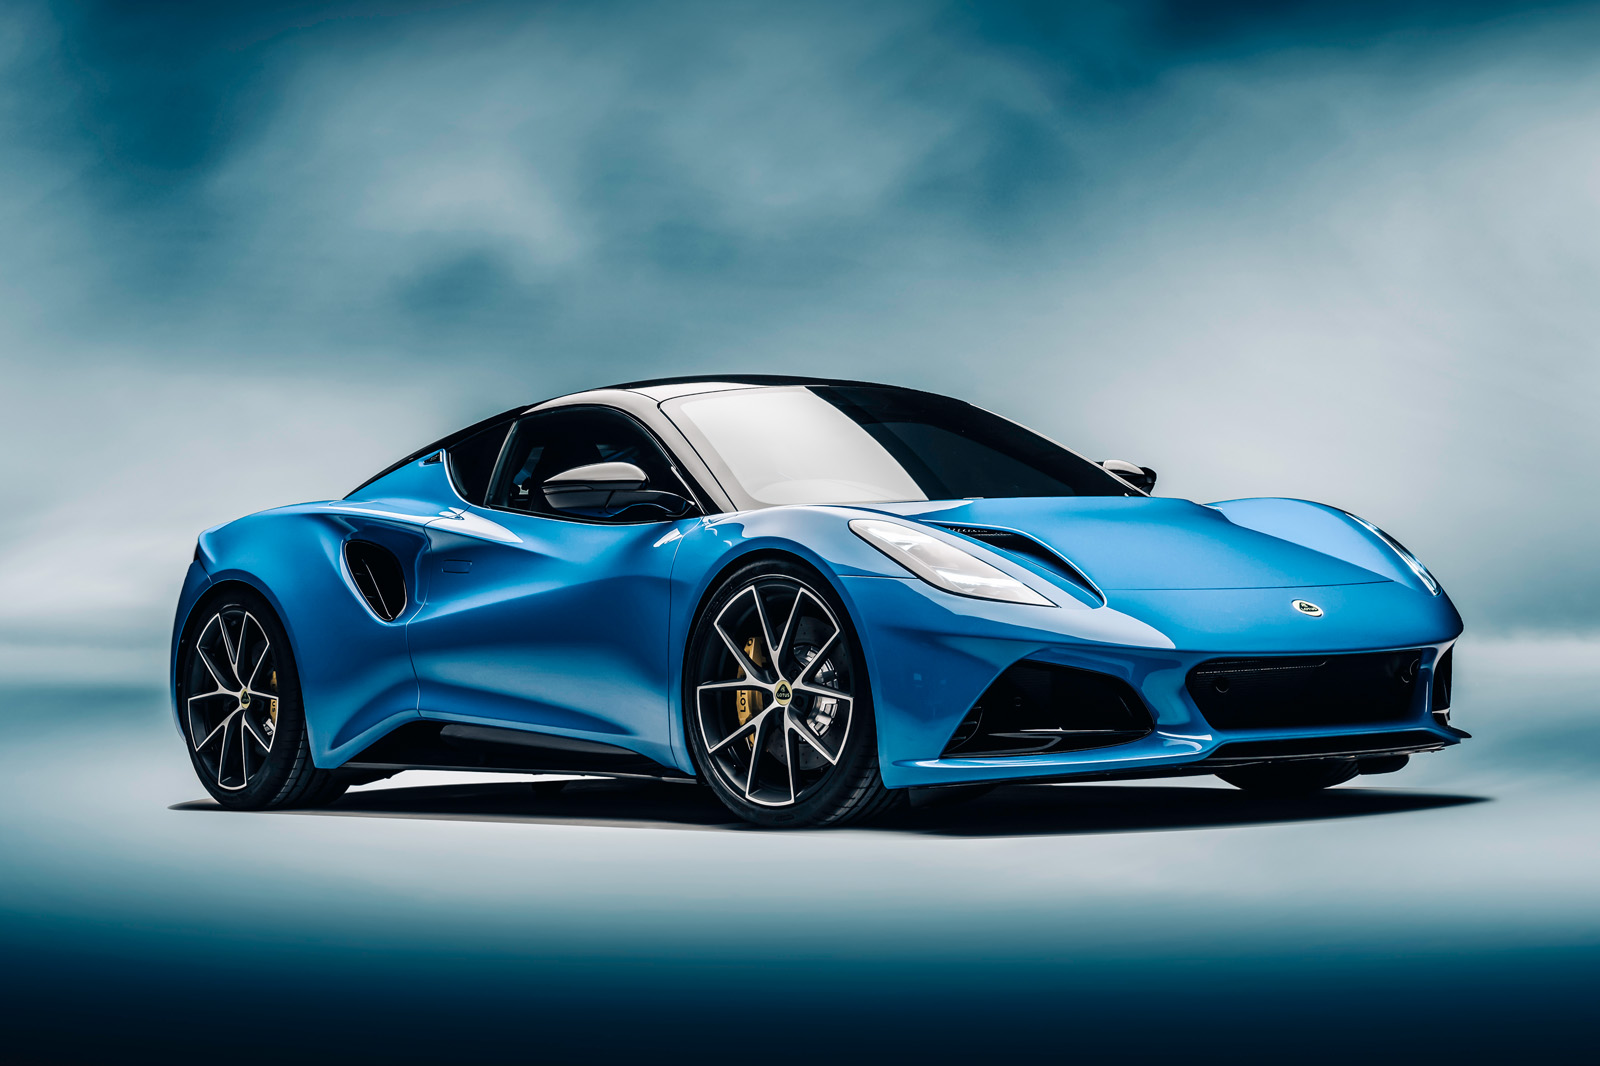 Allnew Lotus Emira priced at £71,995 in First Edition trim Autocar